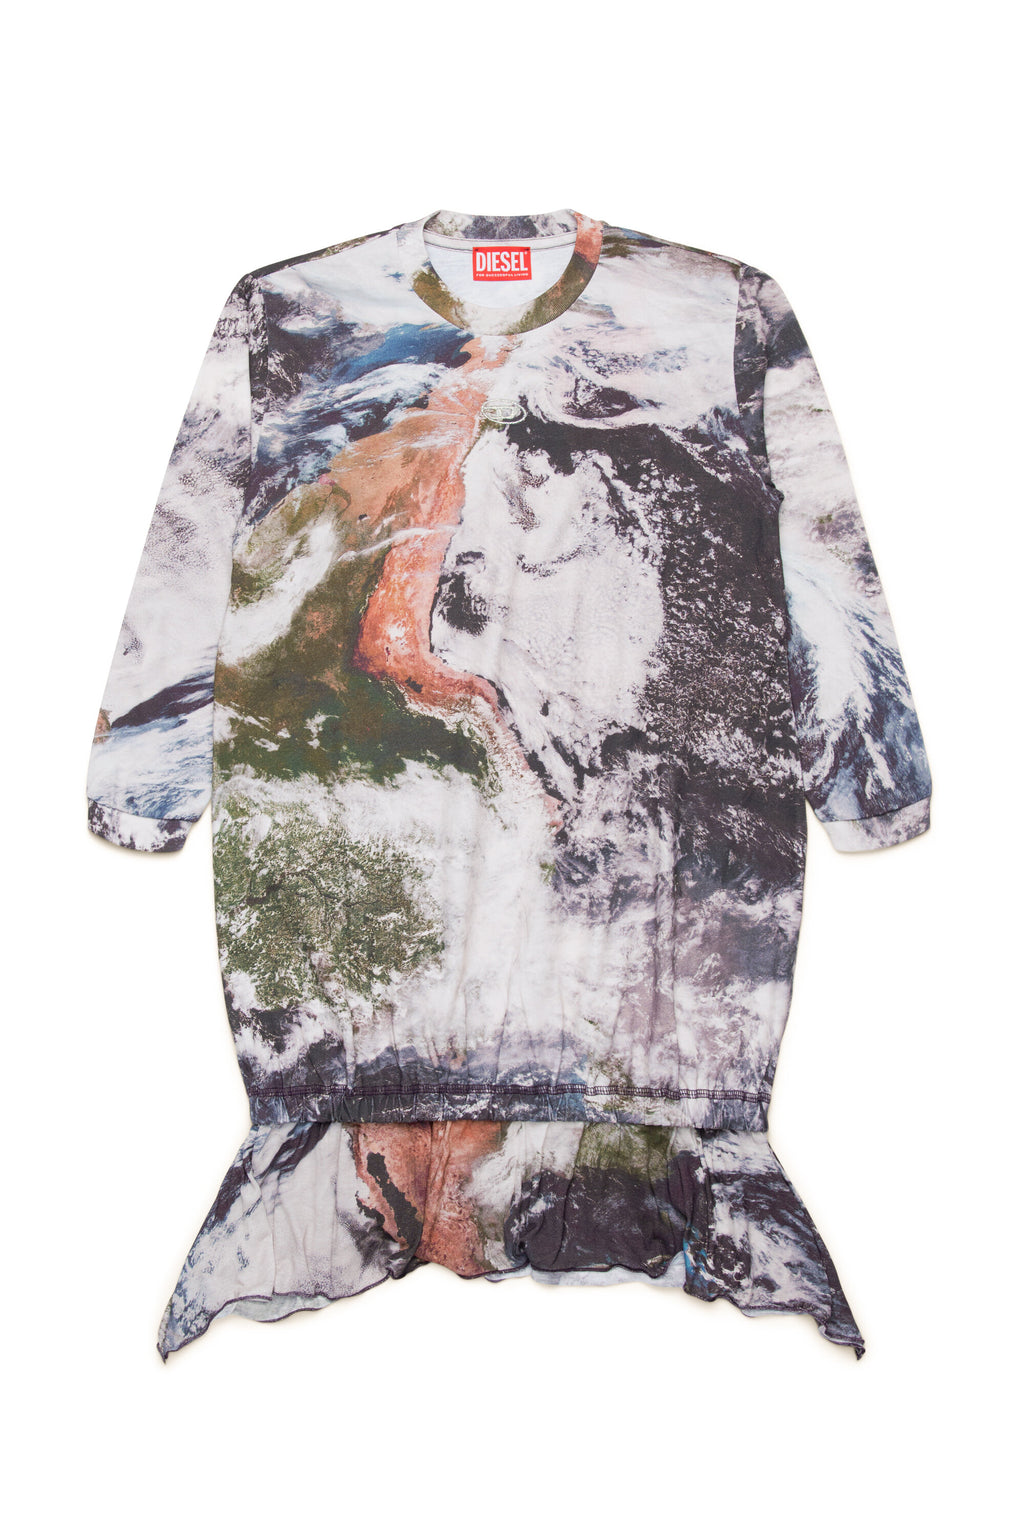 All-over Planet Camou dress